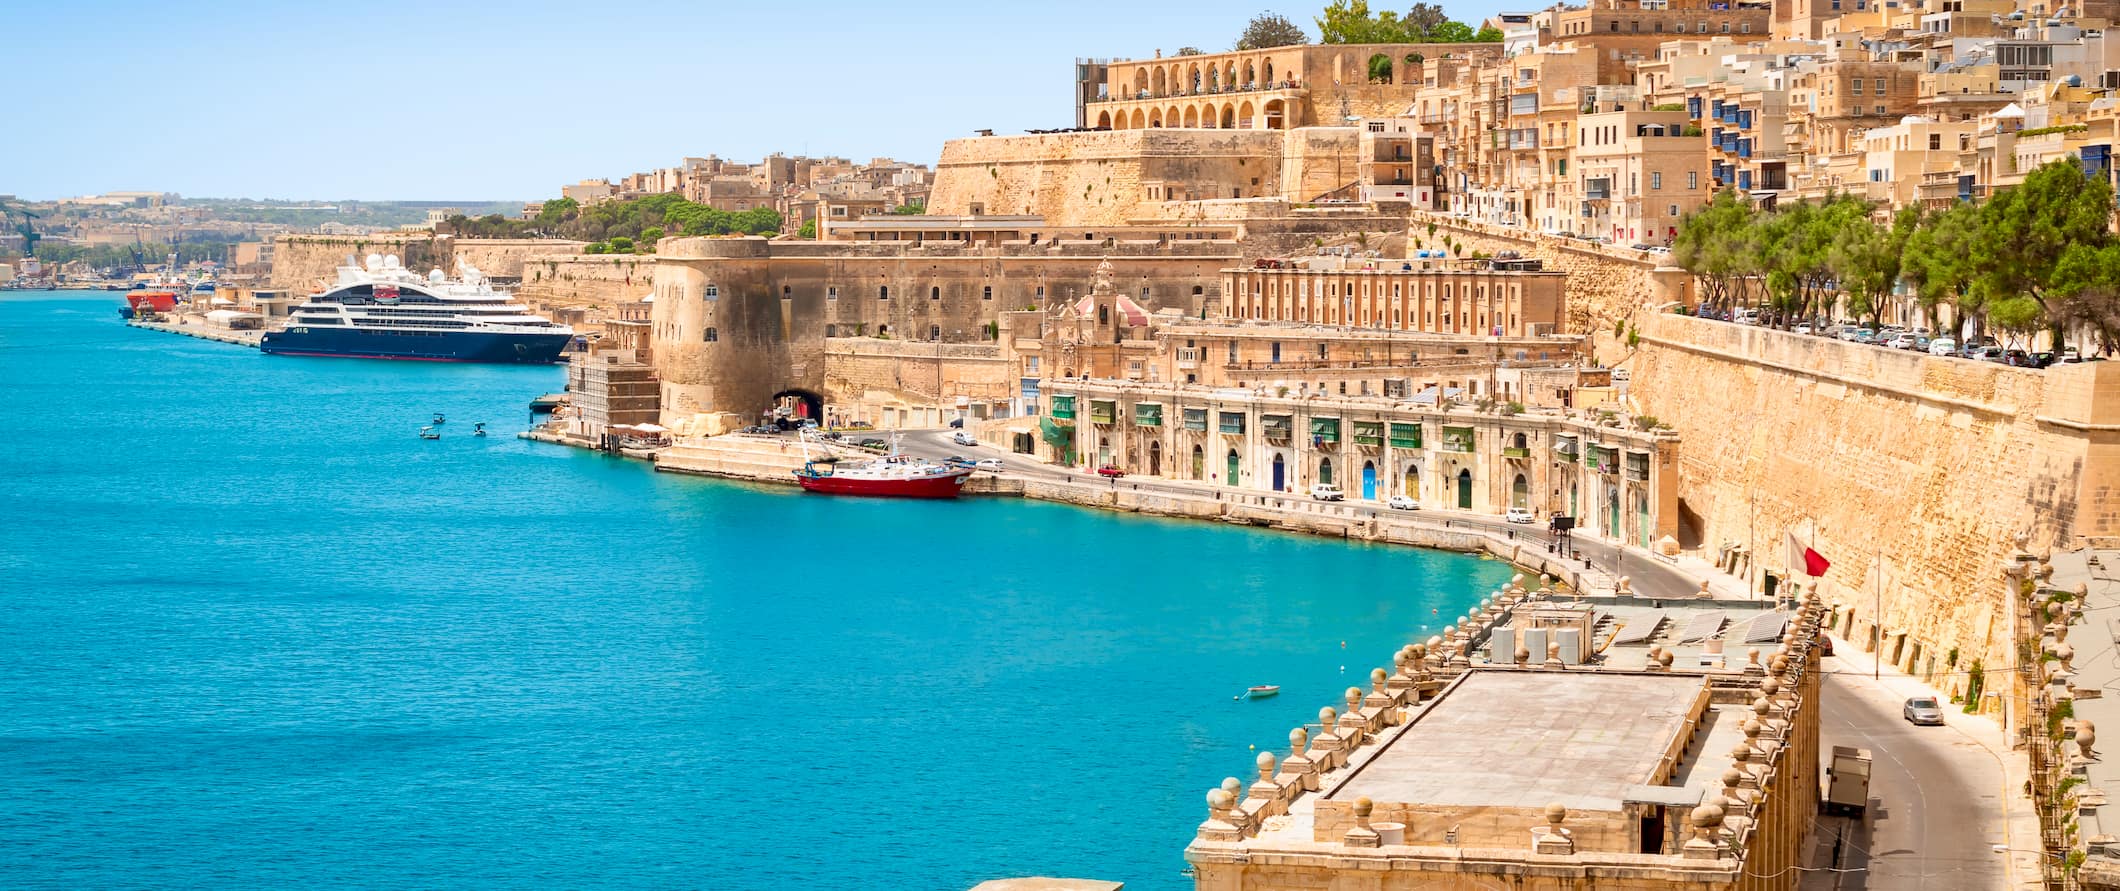 a view of the coast in Malta, lined by towering historic buildings near the harbor